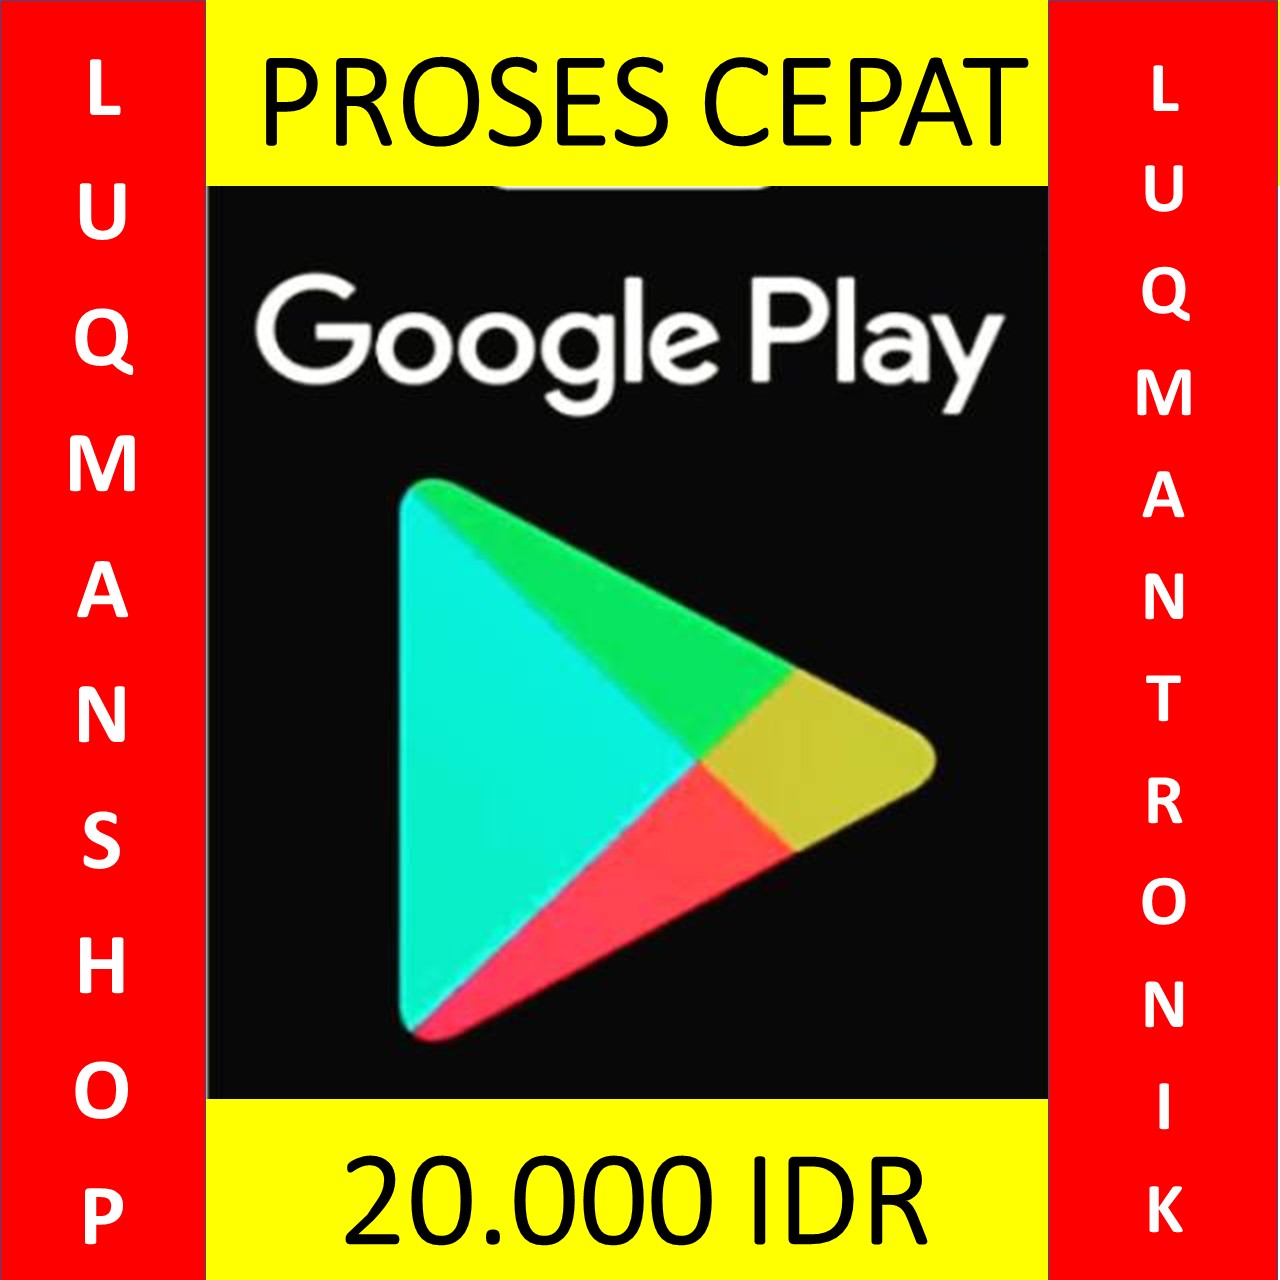 Voucher Game GOOGLE PLAY INDONESIA - Google Play Gift Card Indonesia Rp. 20.000